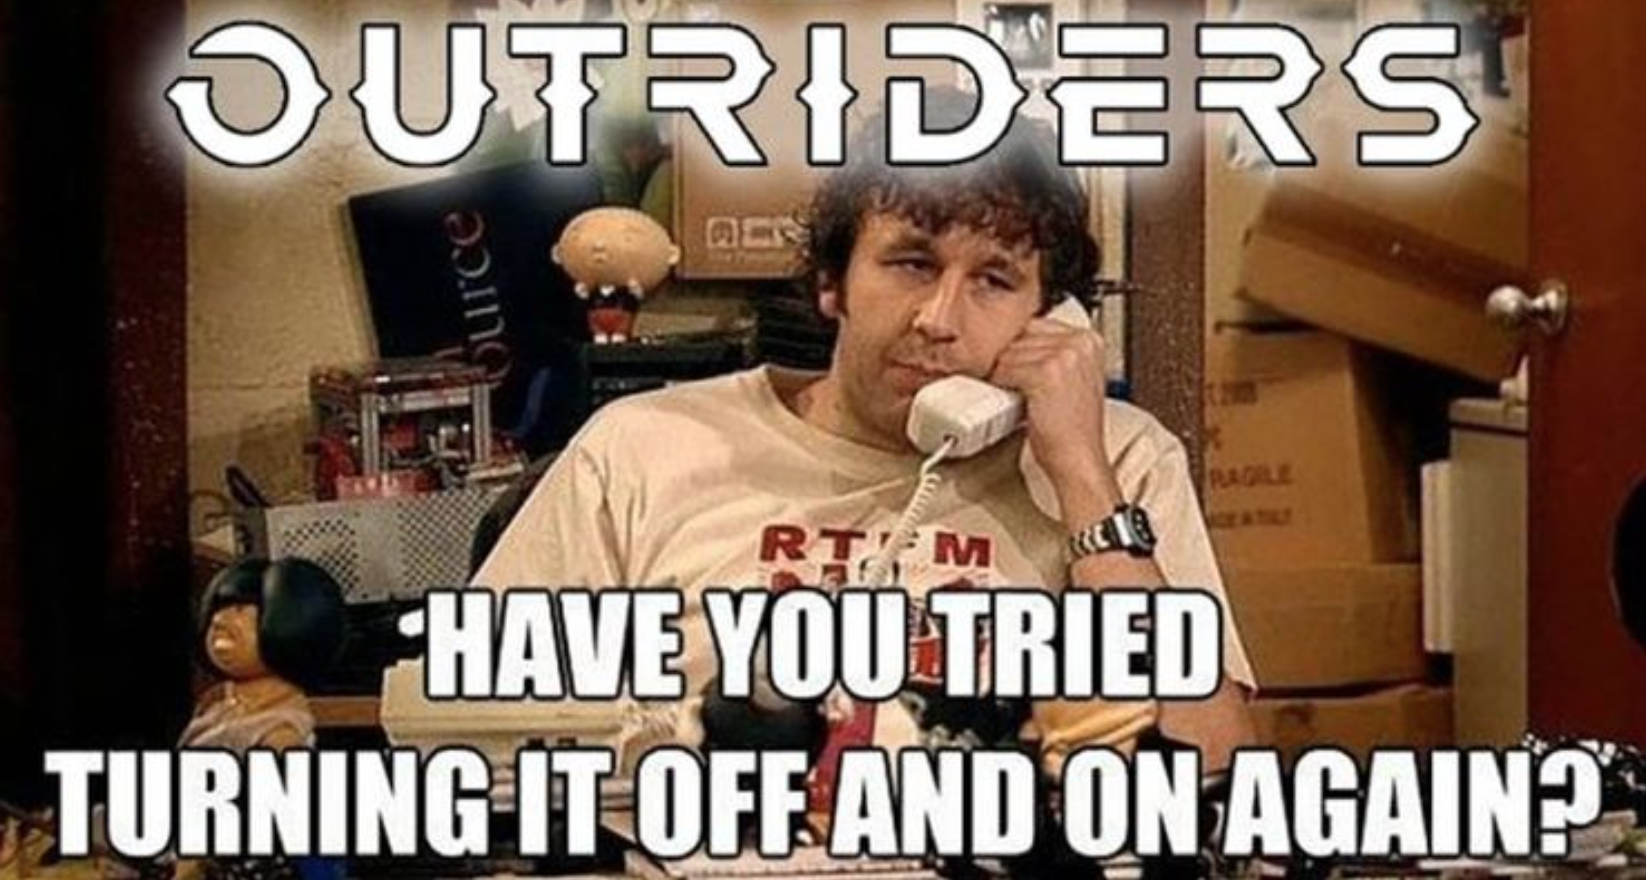 Outriders Memes - off and on again - Jutriders burce Rtm Have You Tried Turning It Off And On Again?